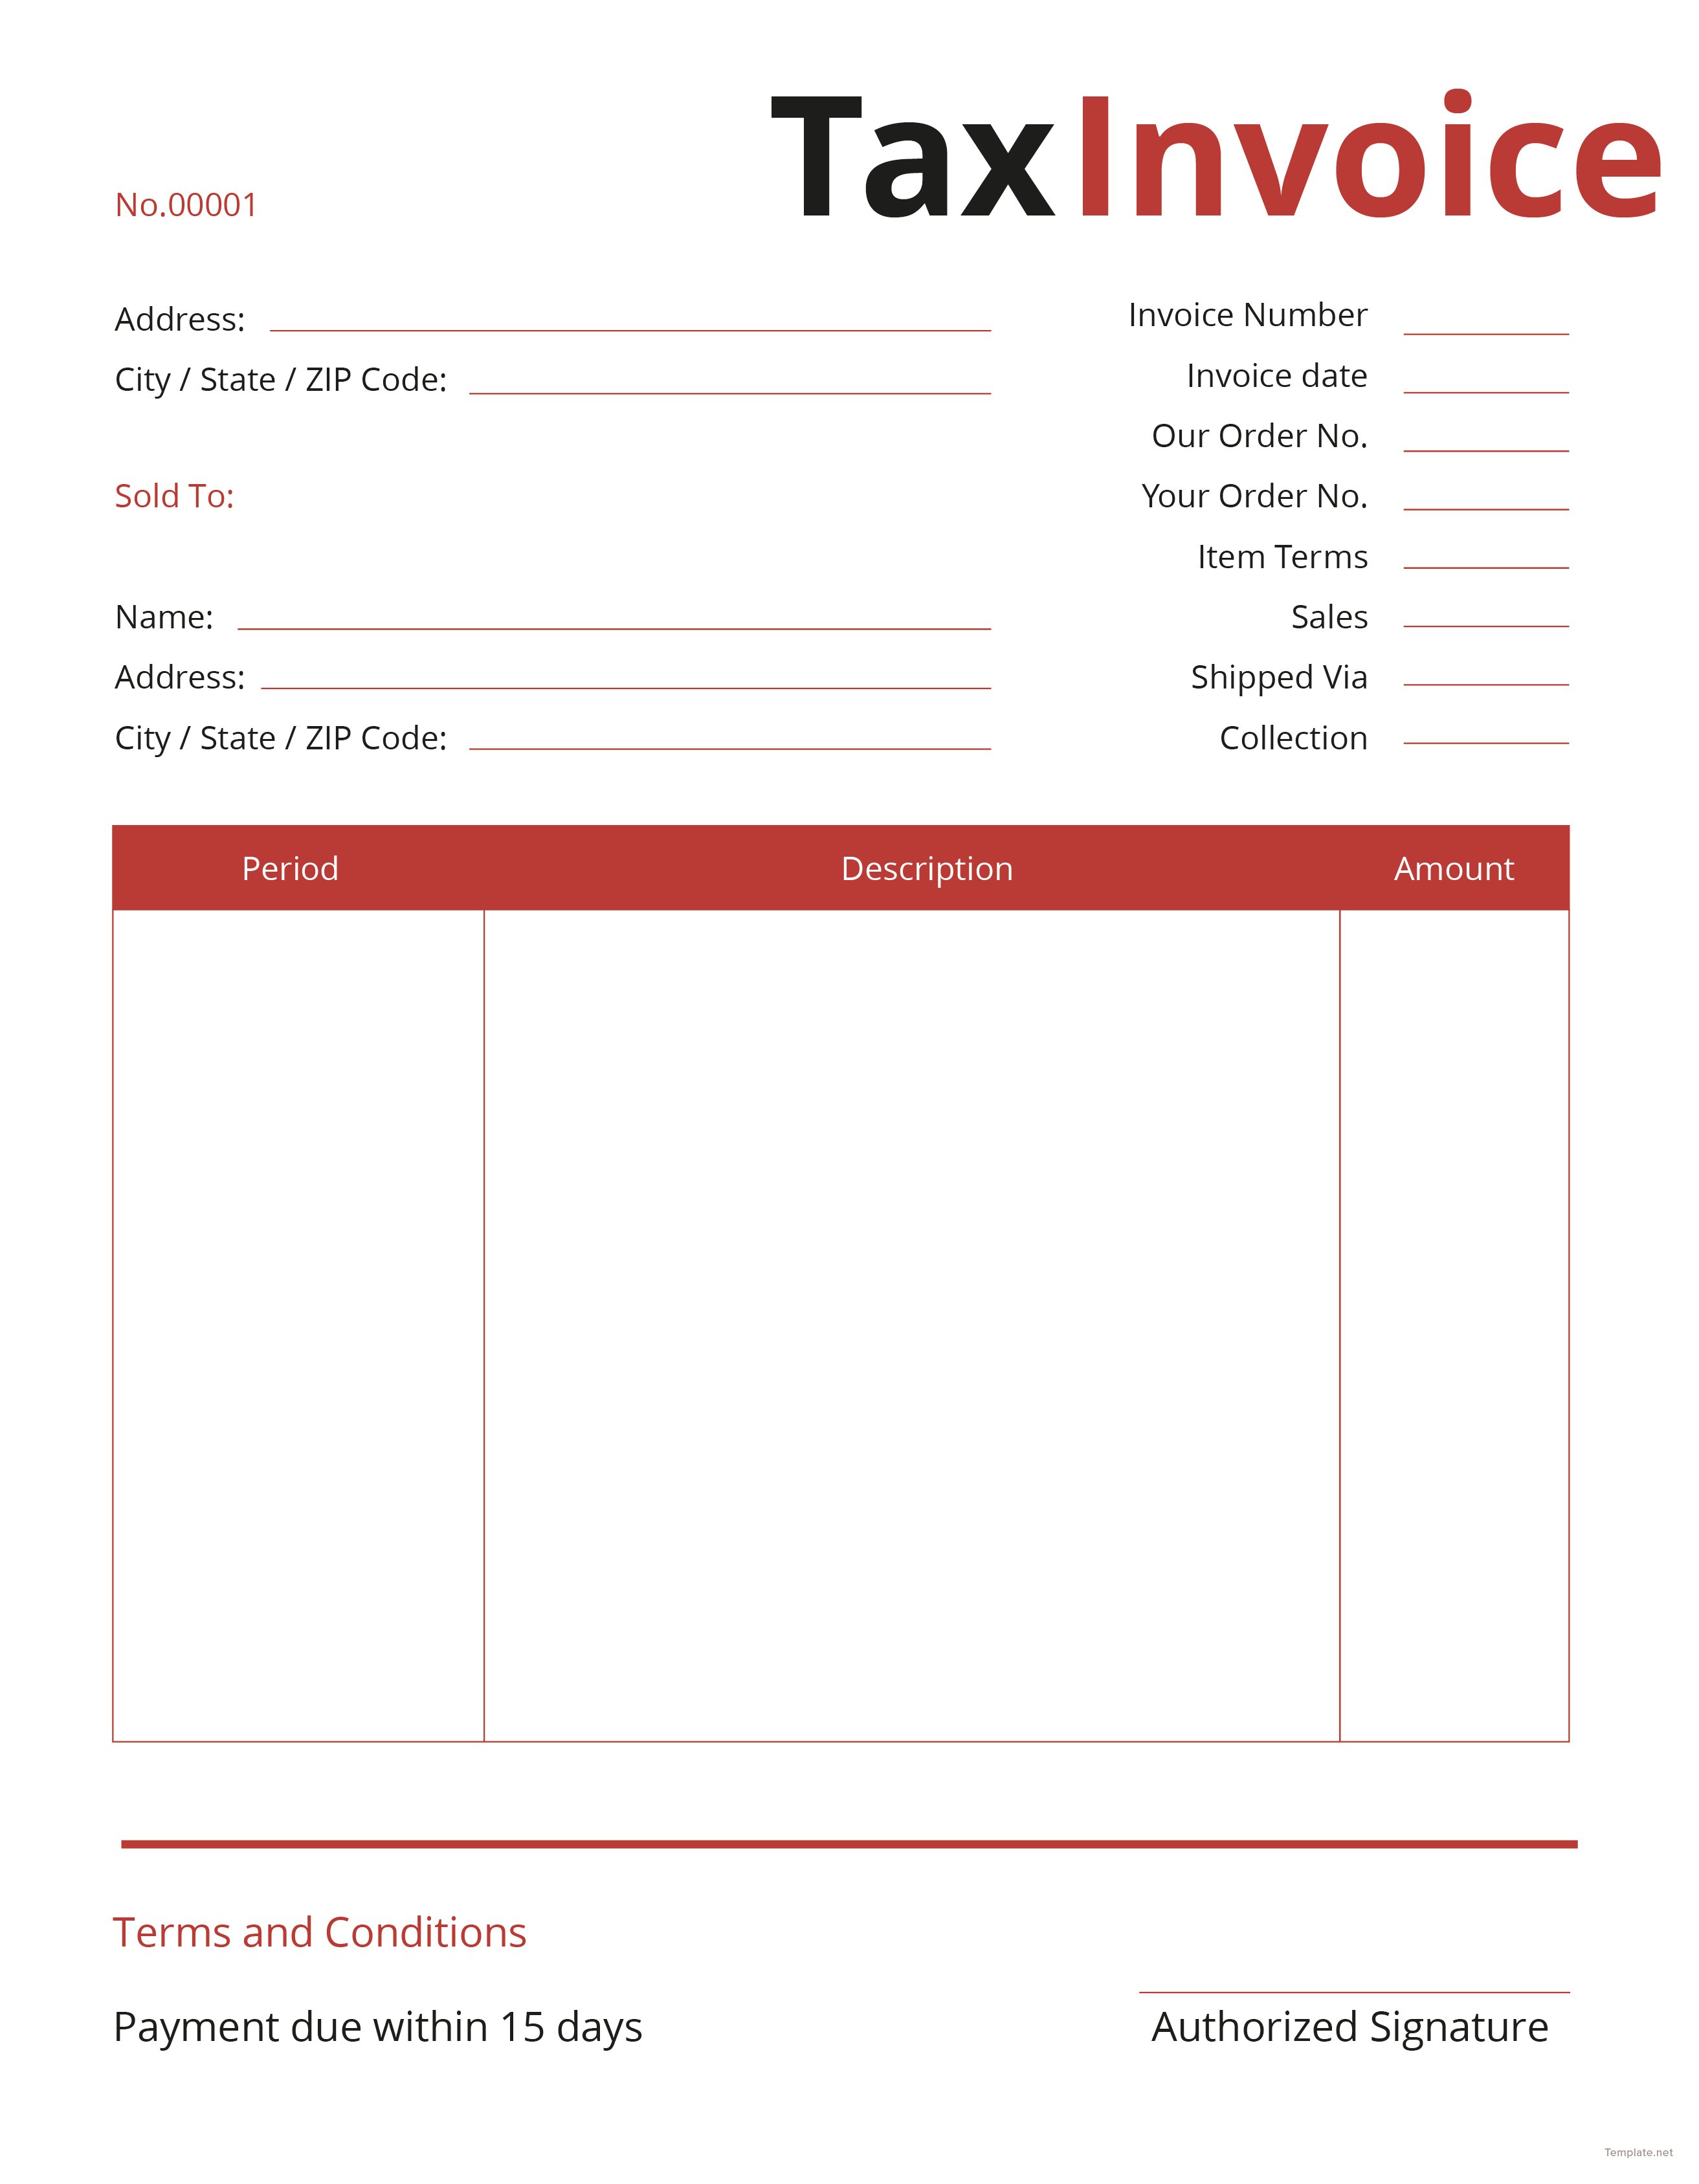 Free Commercial Tax Invoice Template in Adobe Illustrator